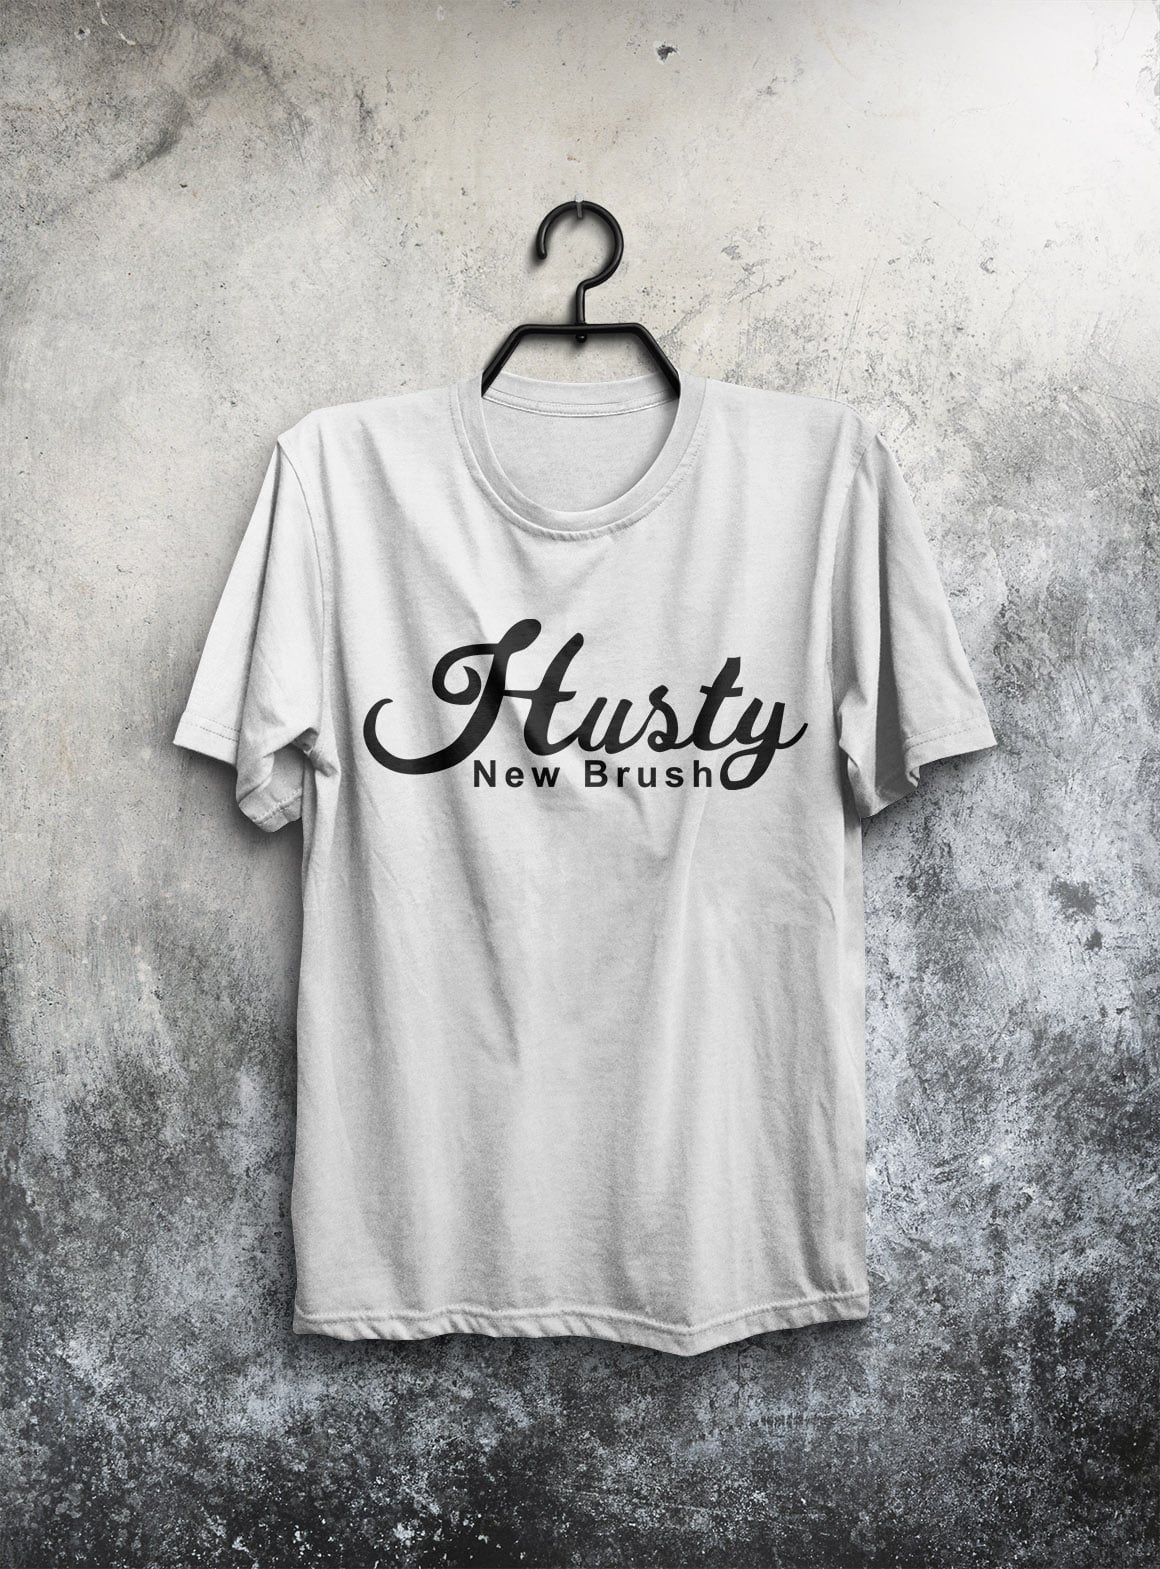 White t-shirt with black font.